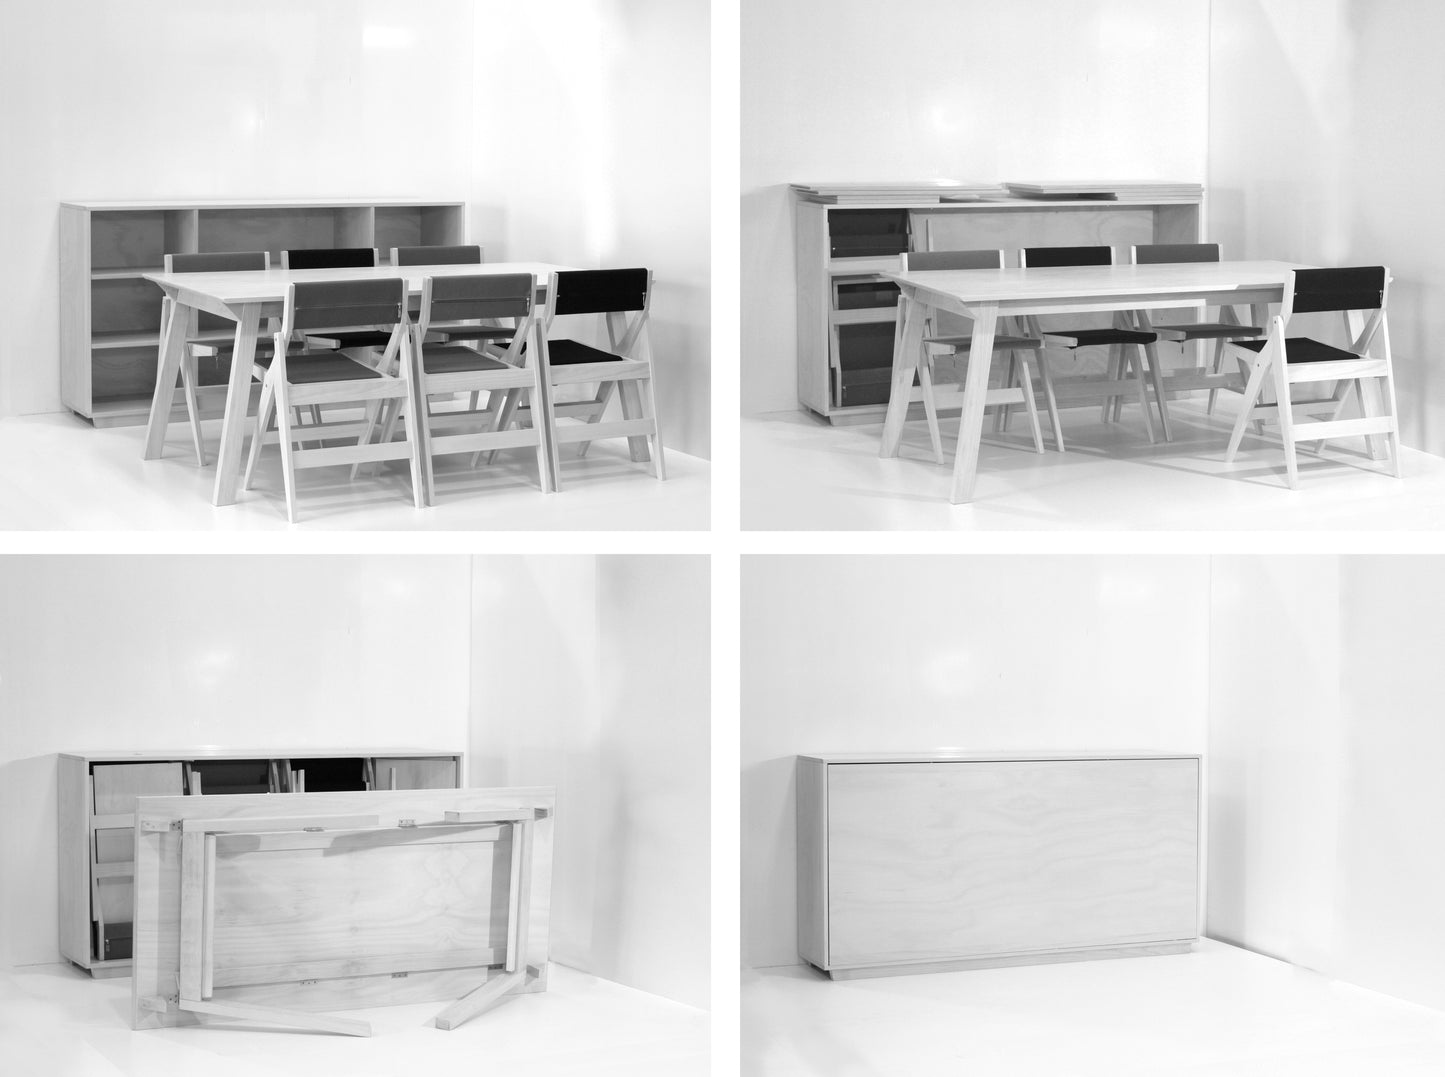 trans-form-it table and chairs with buffet